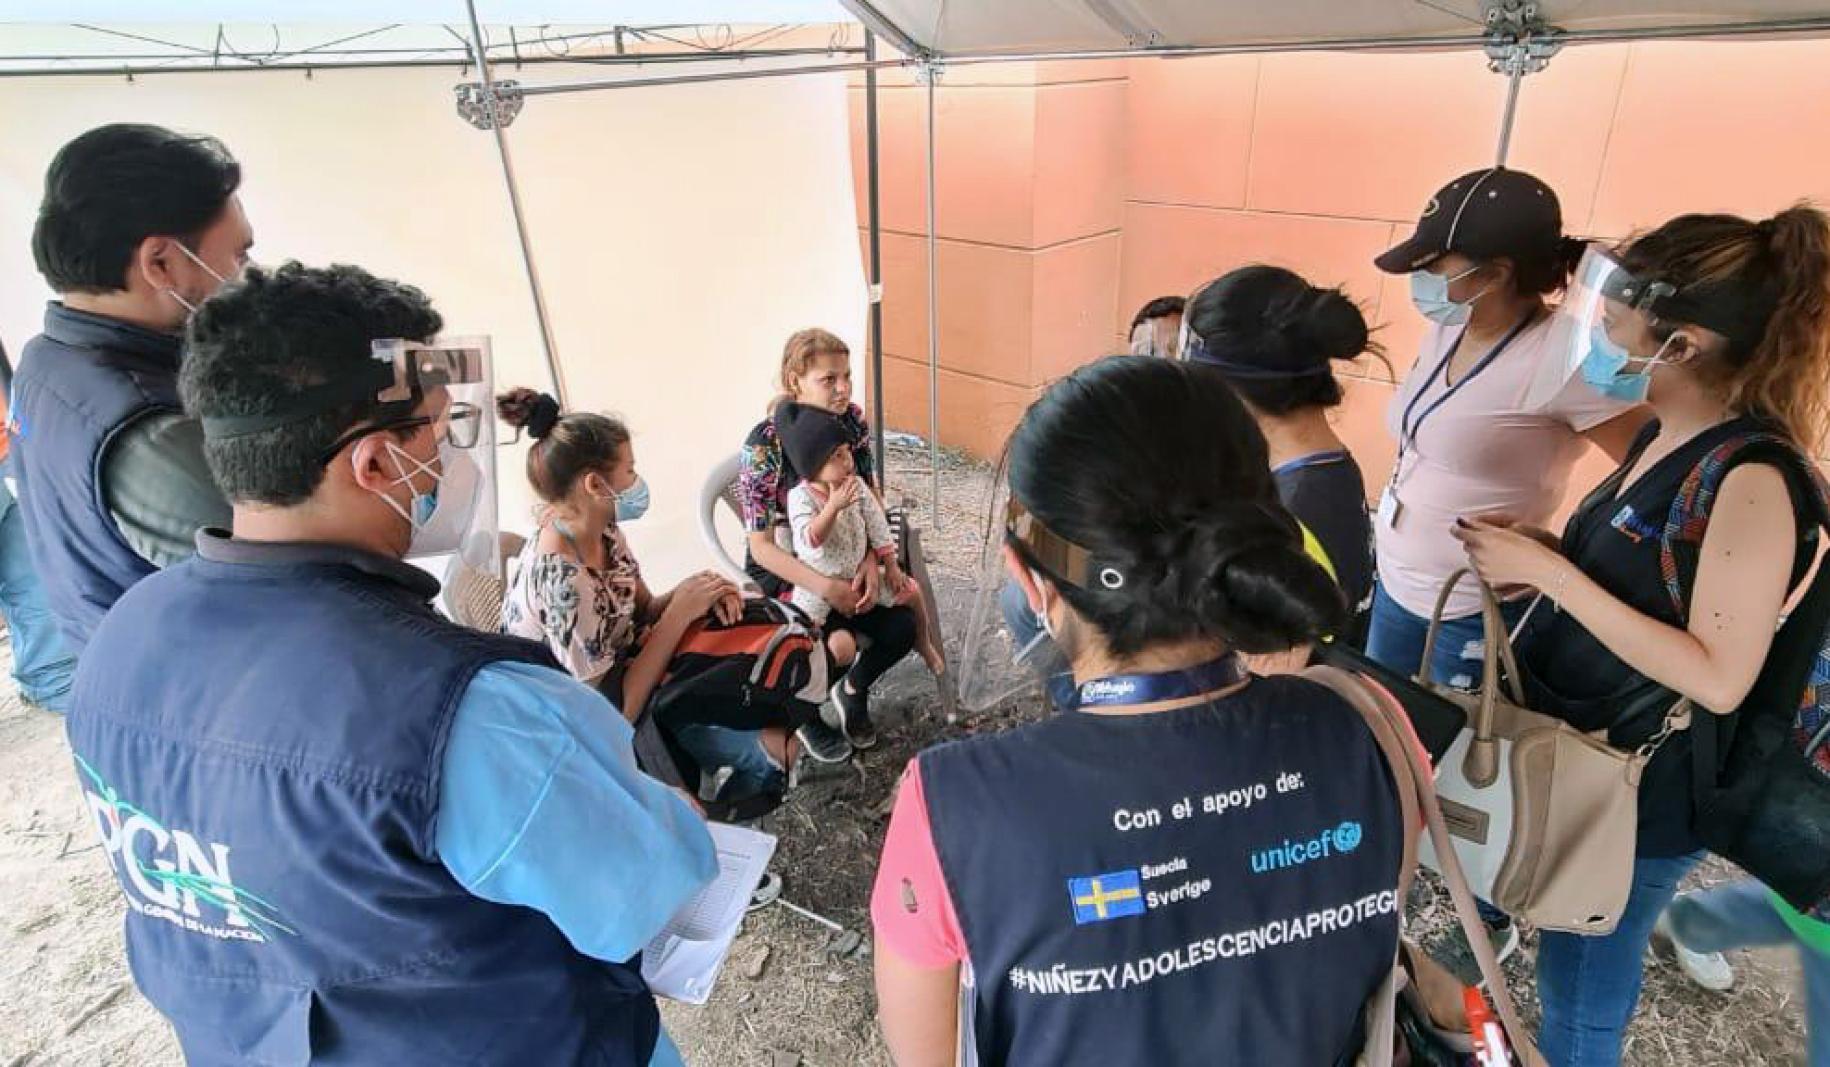 UN personnel wearing face masks and protective face shields  stand surrounding a family sitting, all under a tent.